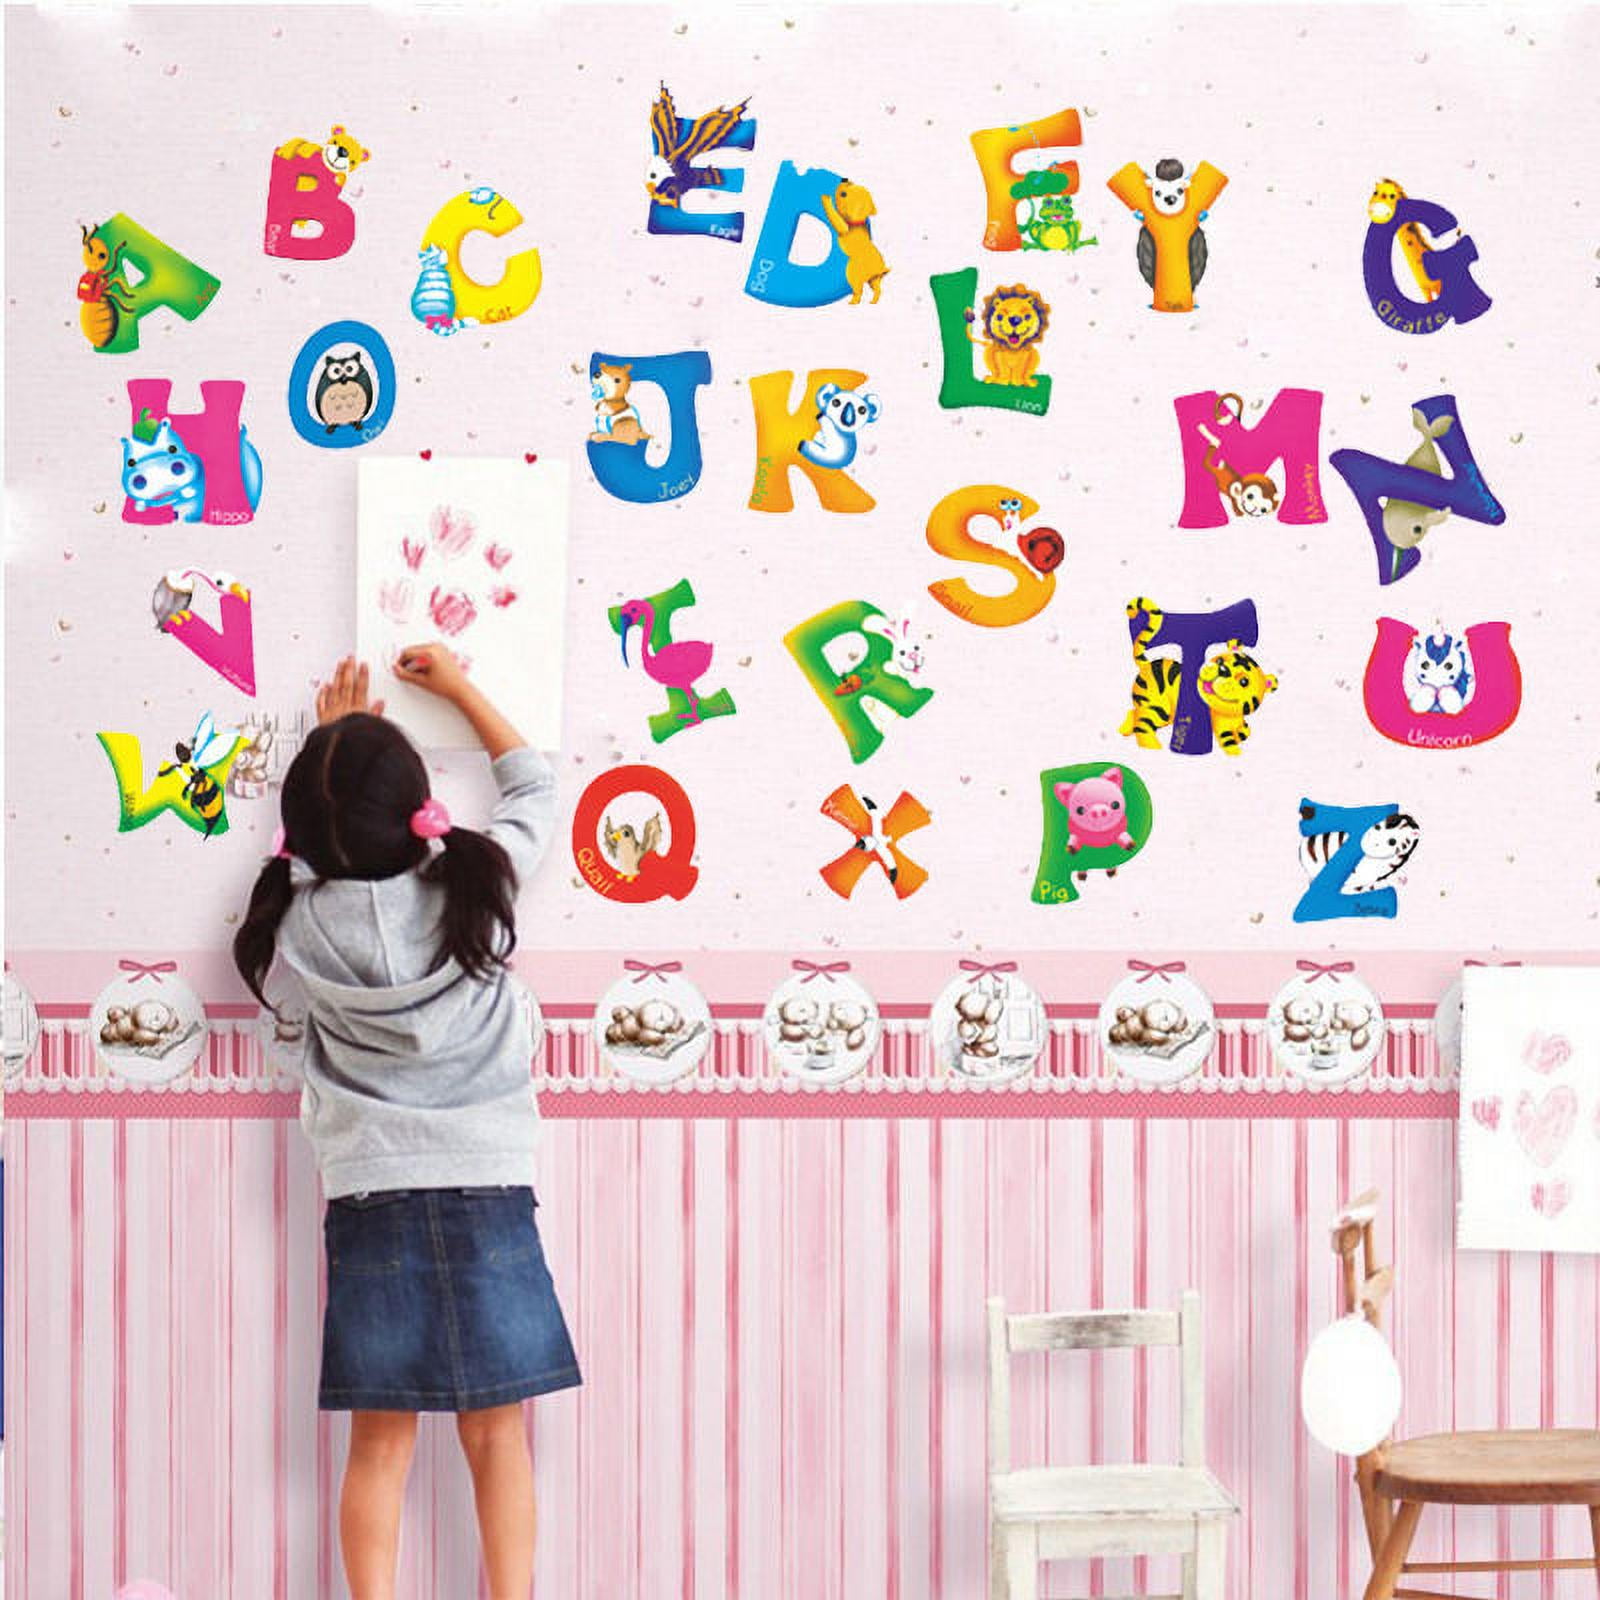 ABC Letters Alphabet Learning Teaching (As Shown) Wall Decal Art Sticker  Picture